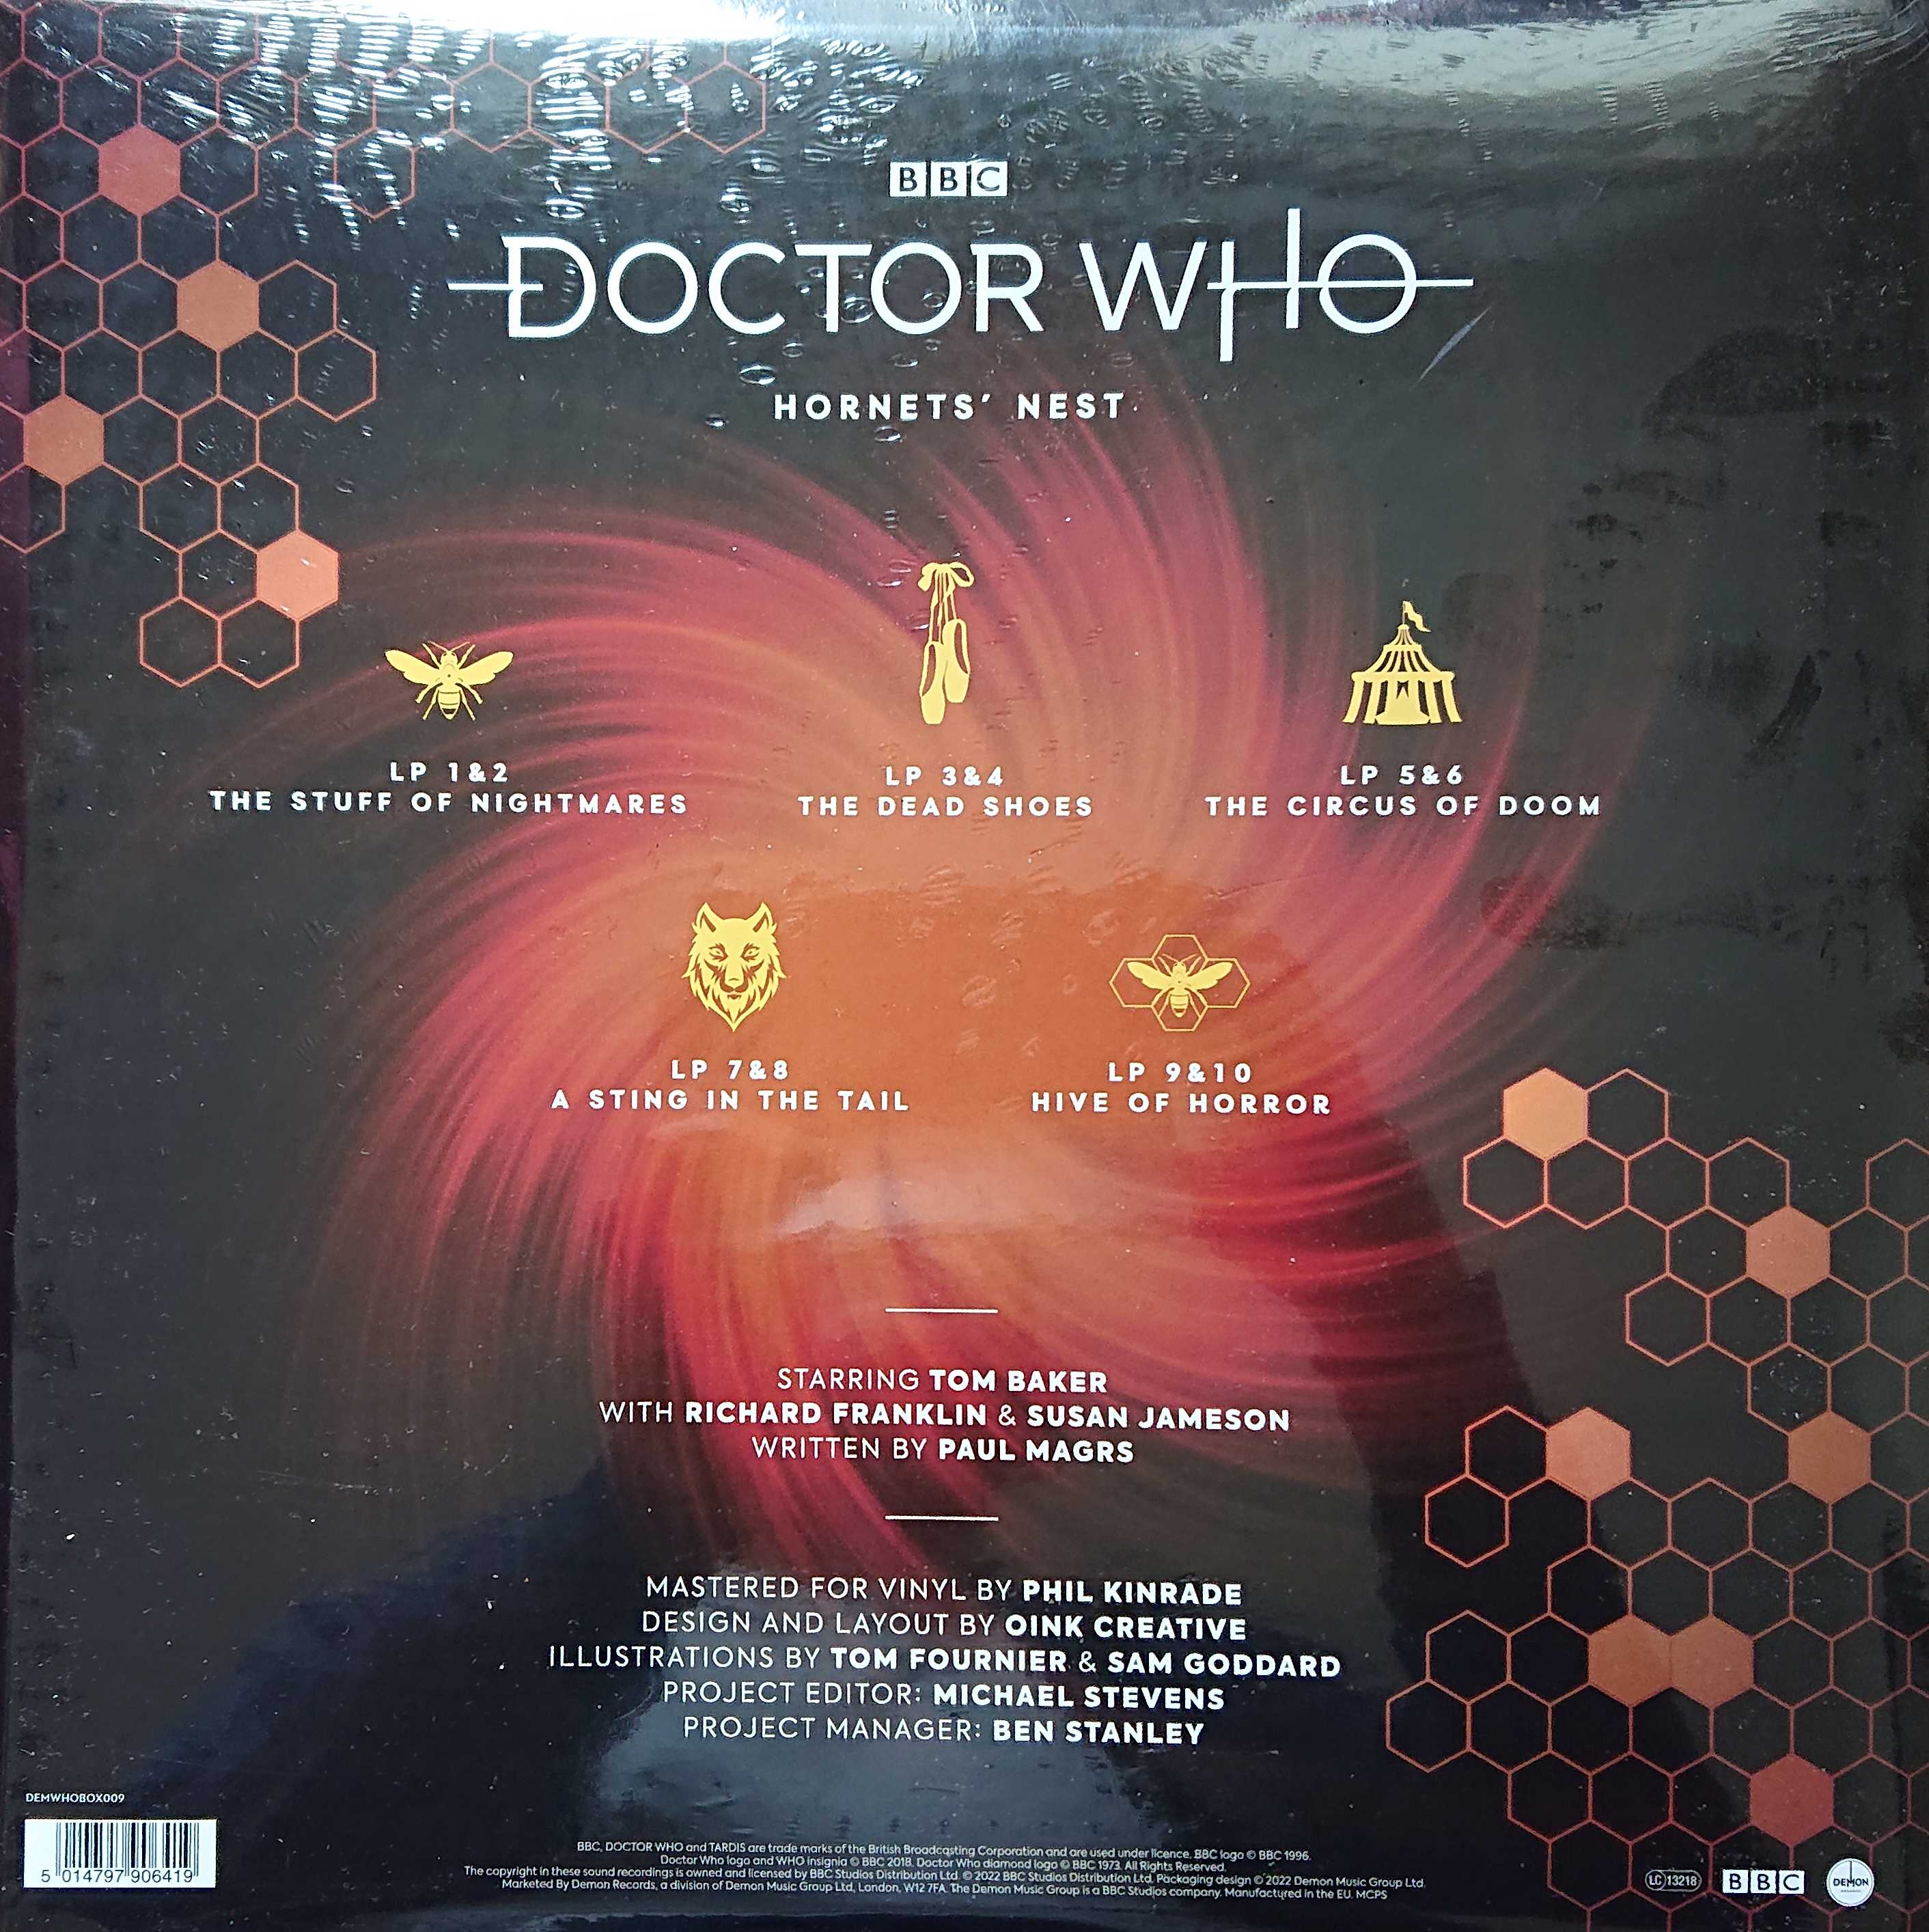 Picture of DEMWHOBOX009 Doctor Who - Hornets' next by artist Paul Magrs from the BBC records and Tapes library